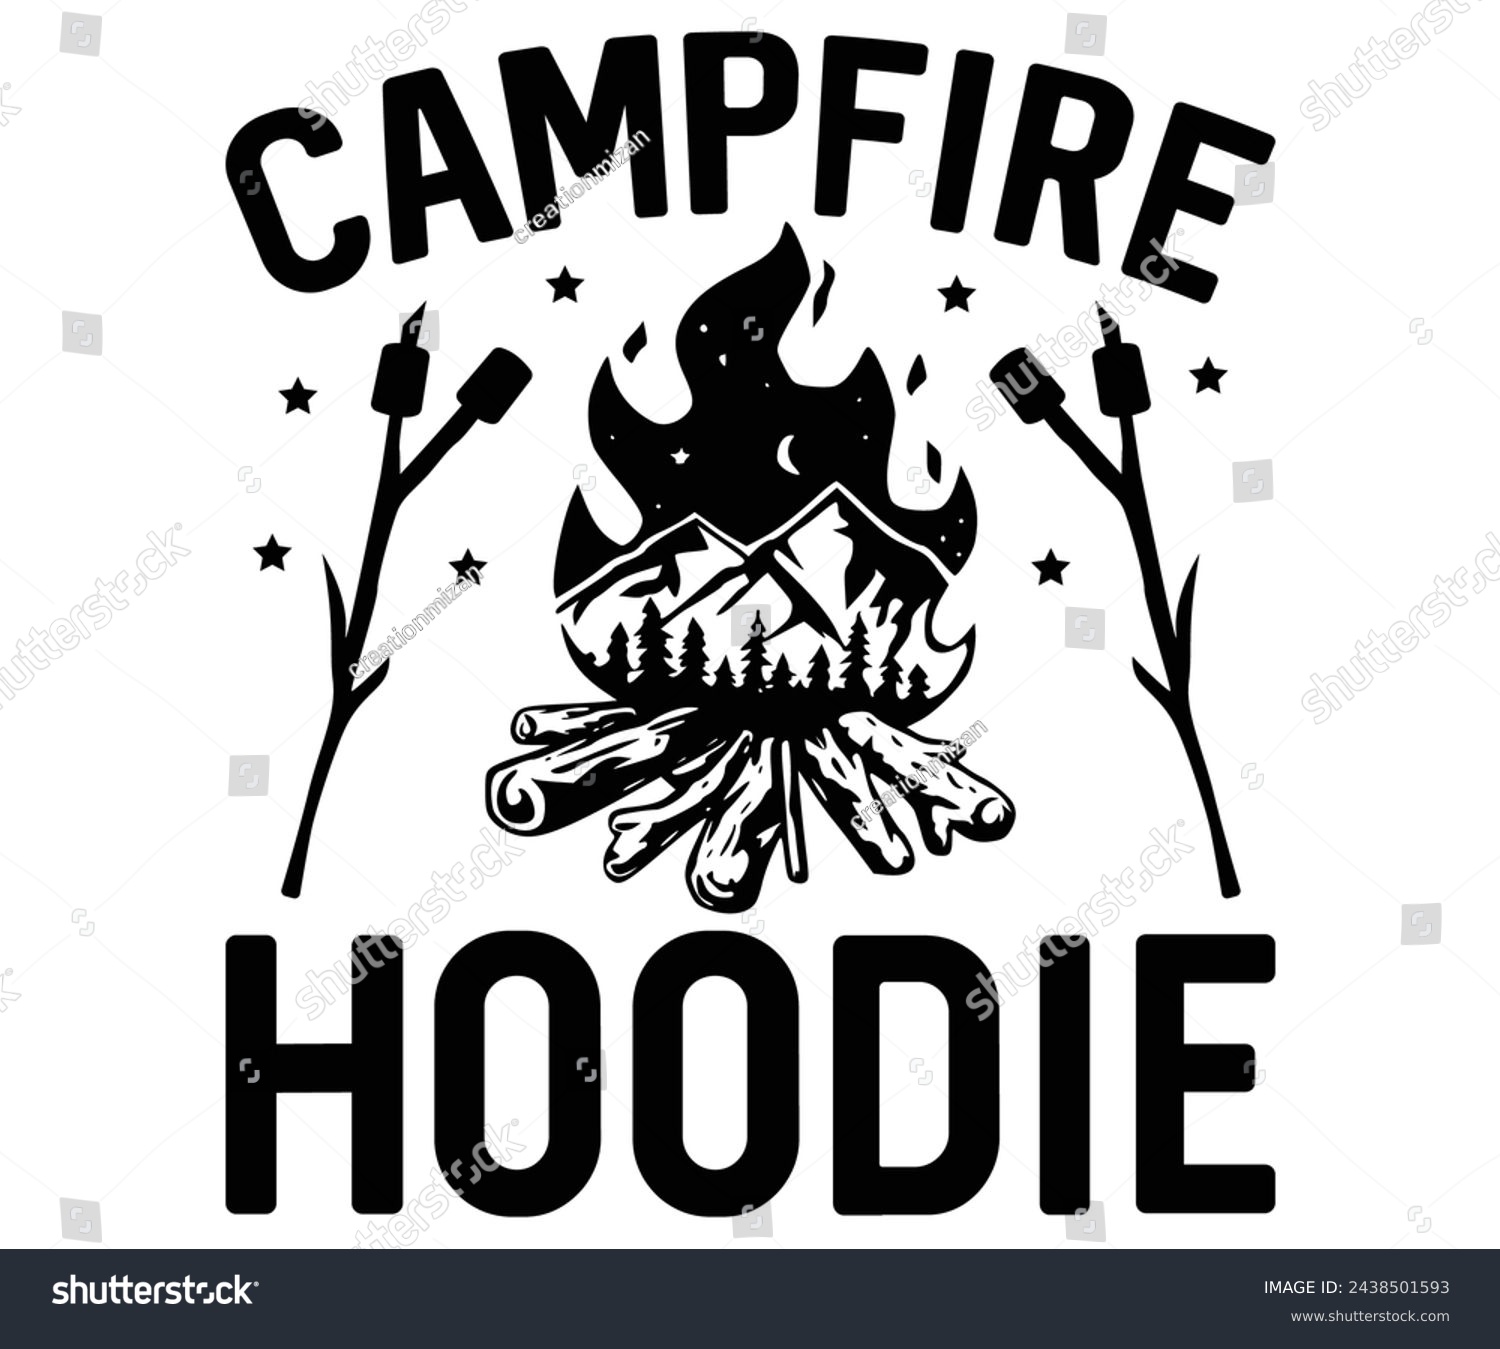 SVG of Campfire Hoodie Svg,Camping Svg,Hiking,Funny Camping,Adventure,Summer Camp,Happy Camper,Camp Life,Camp Saying,Camping Shirt svg